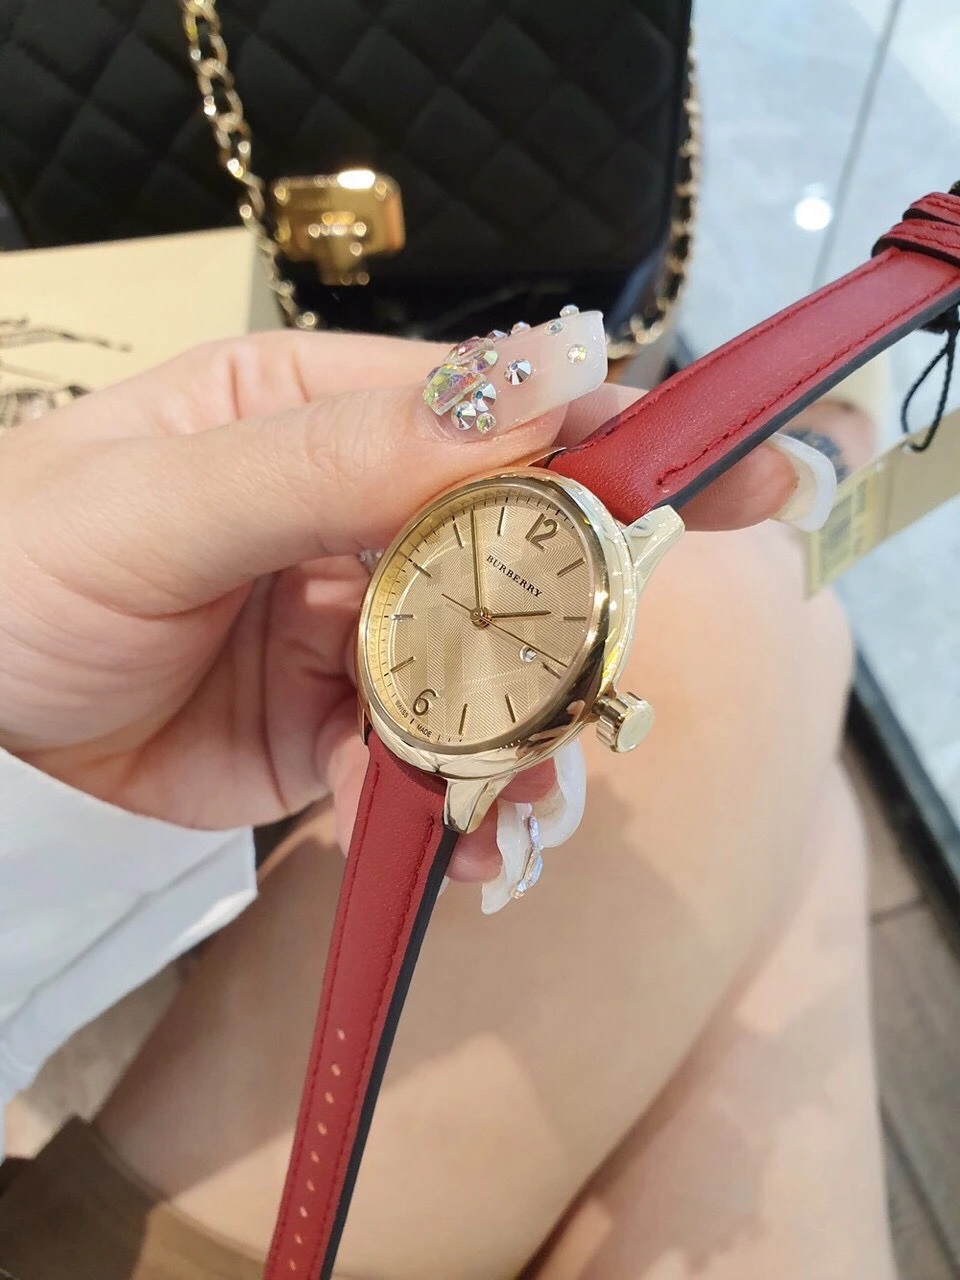 ĐỒNG HỒ NỮ DÂY DA BURBERRY THE CLASSIC ROUND RED LEATHER STRAP LADIES WATCH BU10102 5